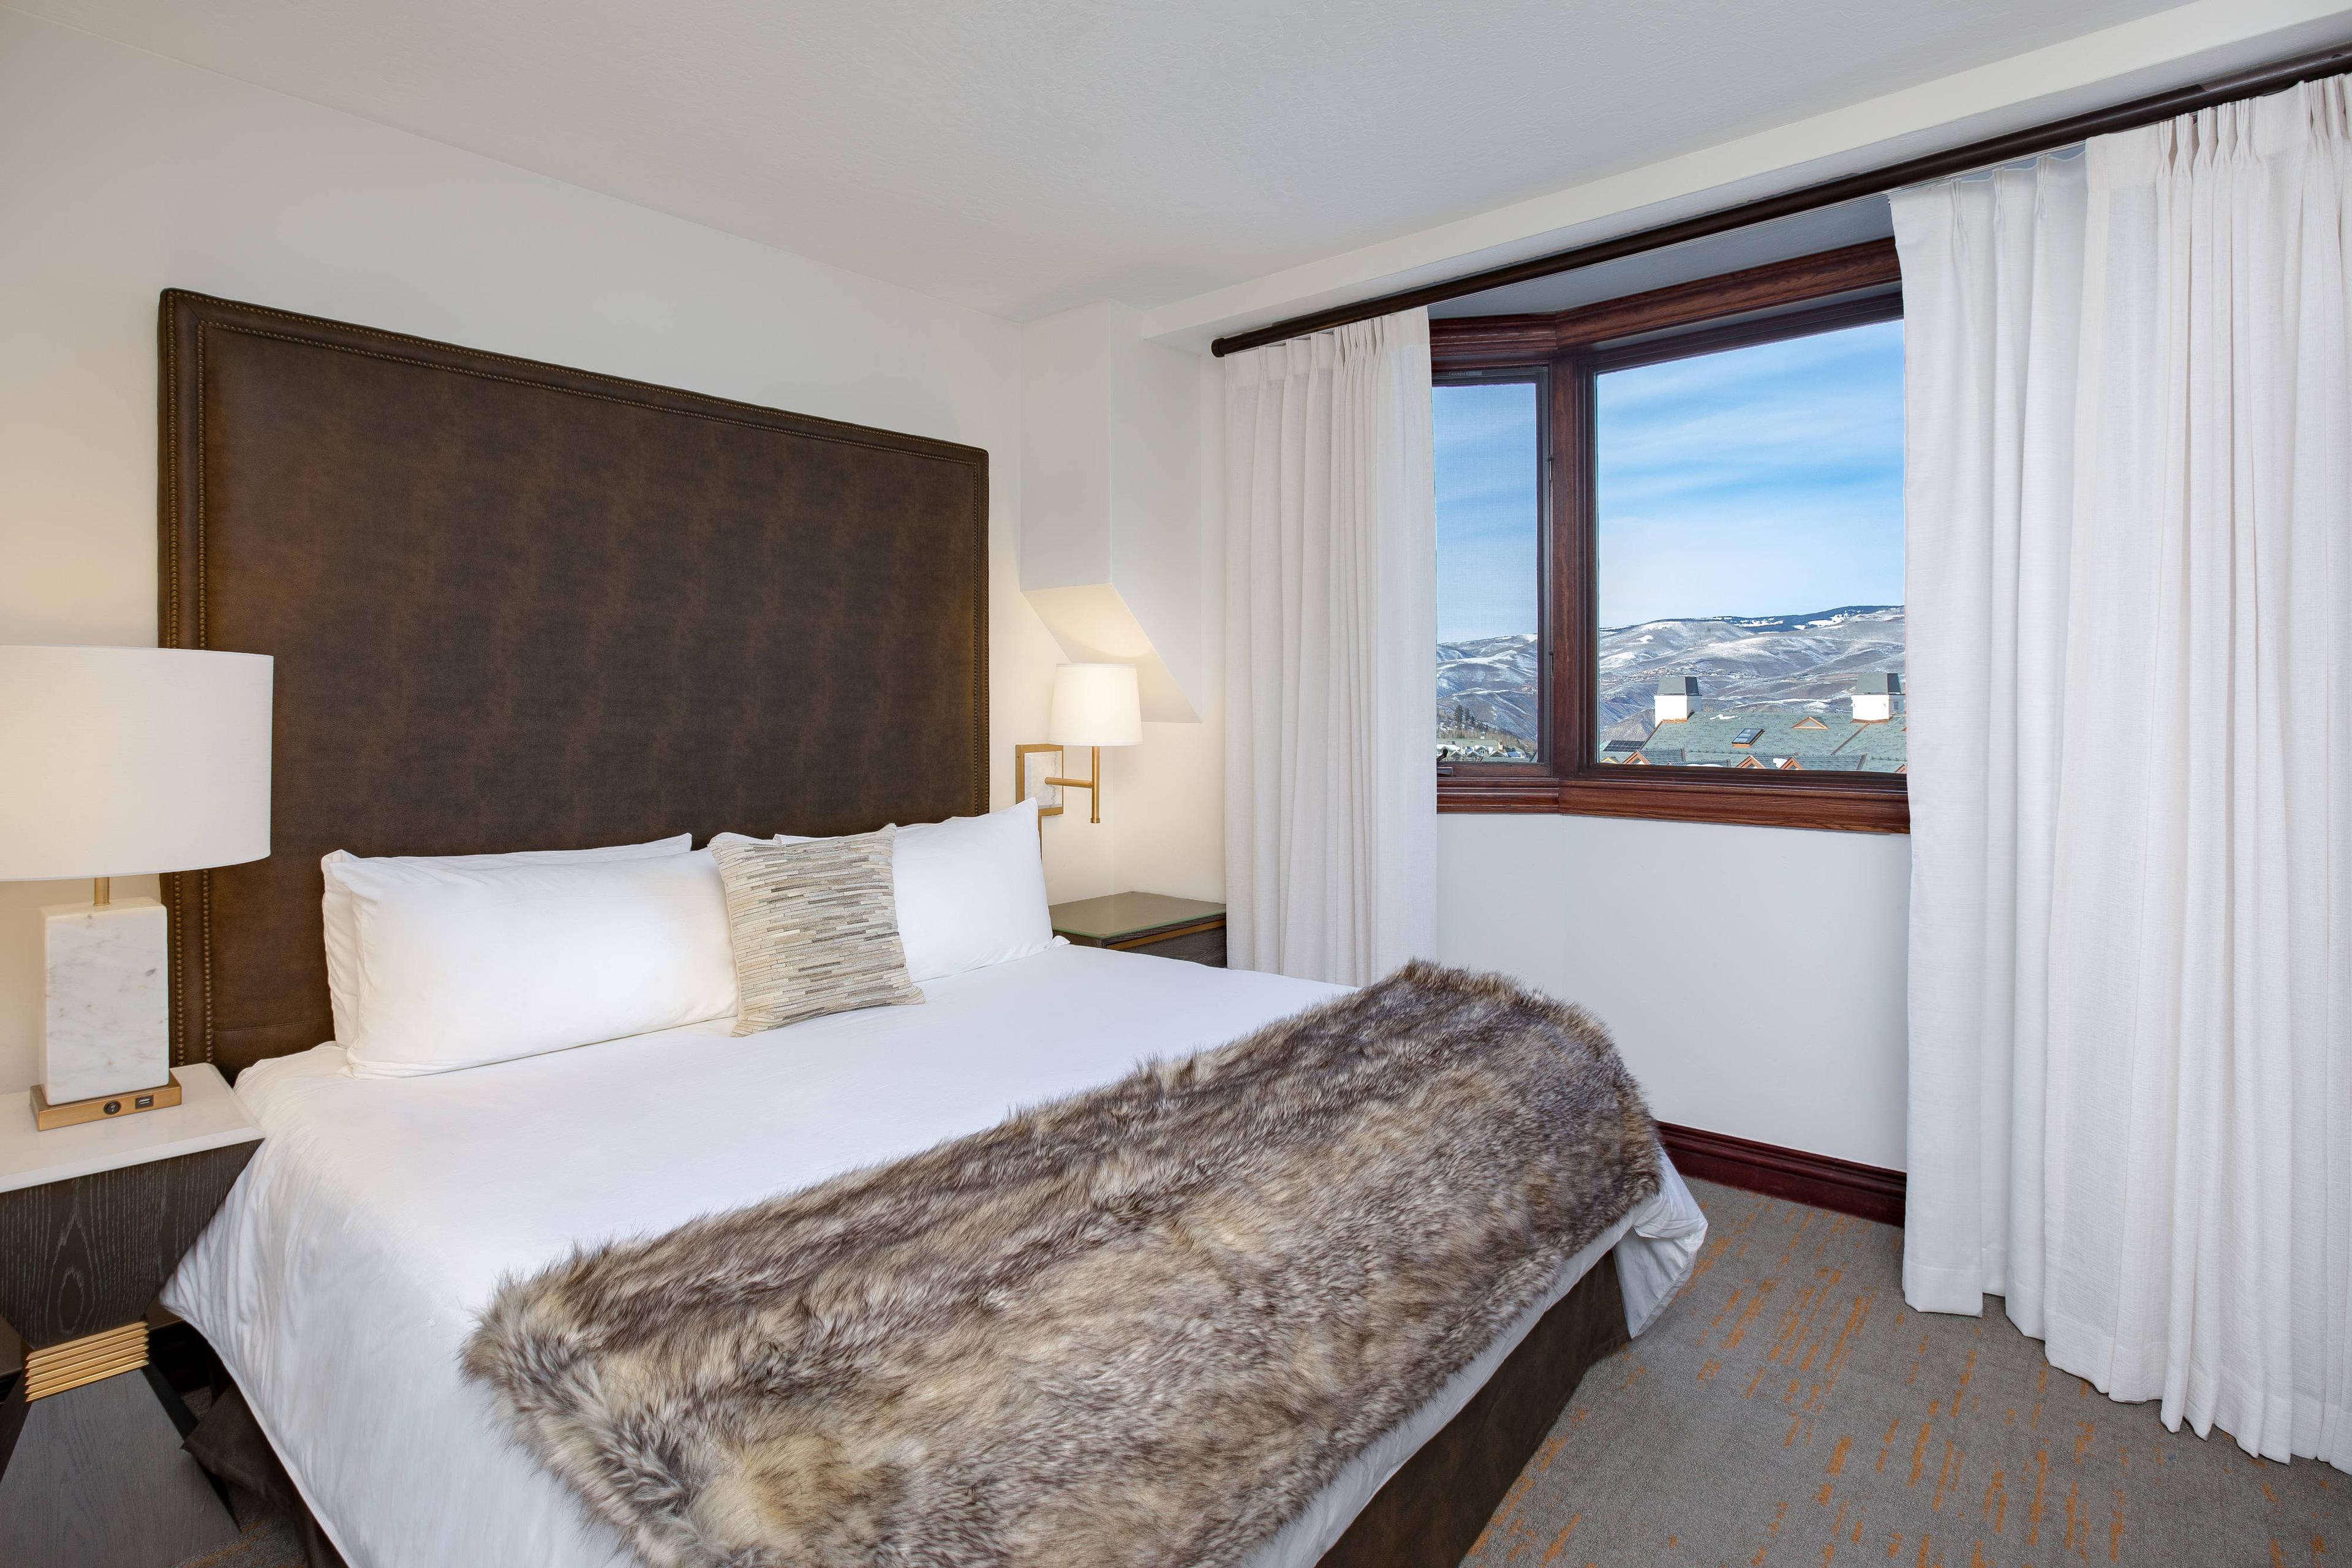 From your large suite with a king-size bed, experience spectacular resort views of the valley below while you lounge on plush bedding with your faux fur throw.